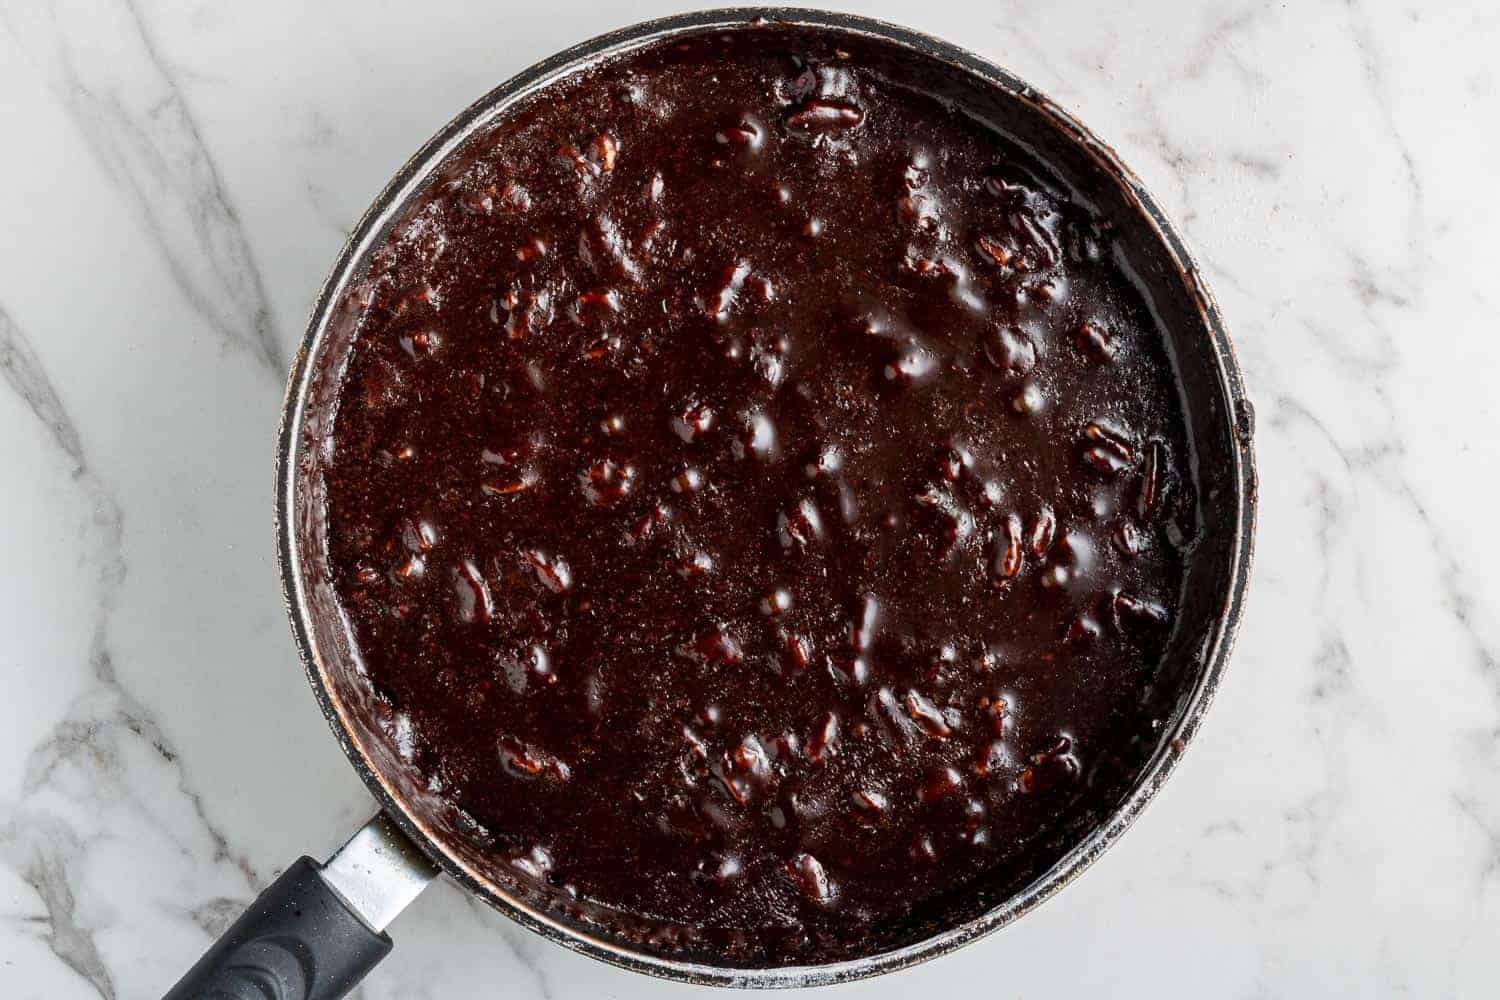 Chocolate frosting with pecans in a saucepan.